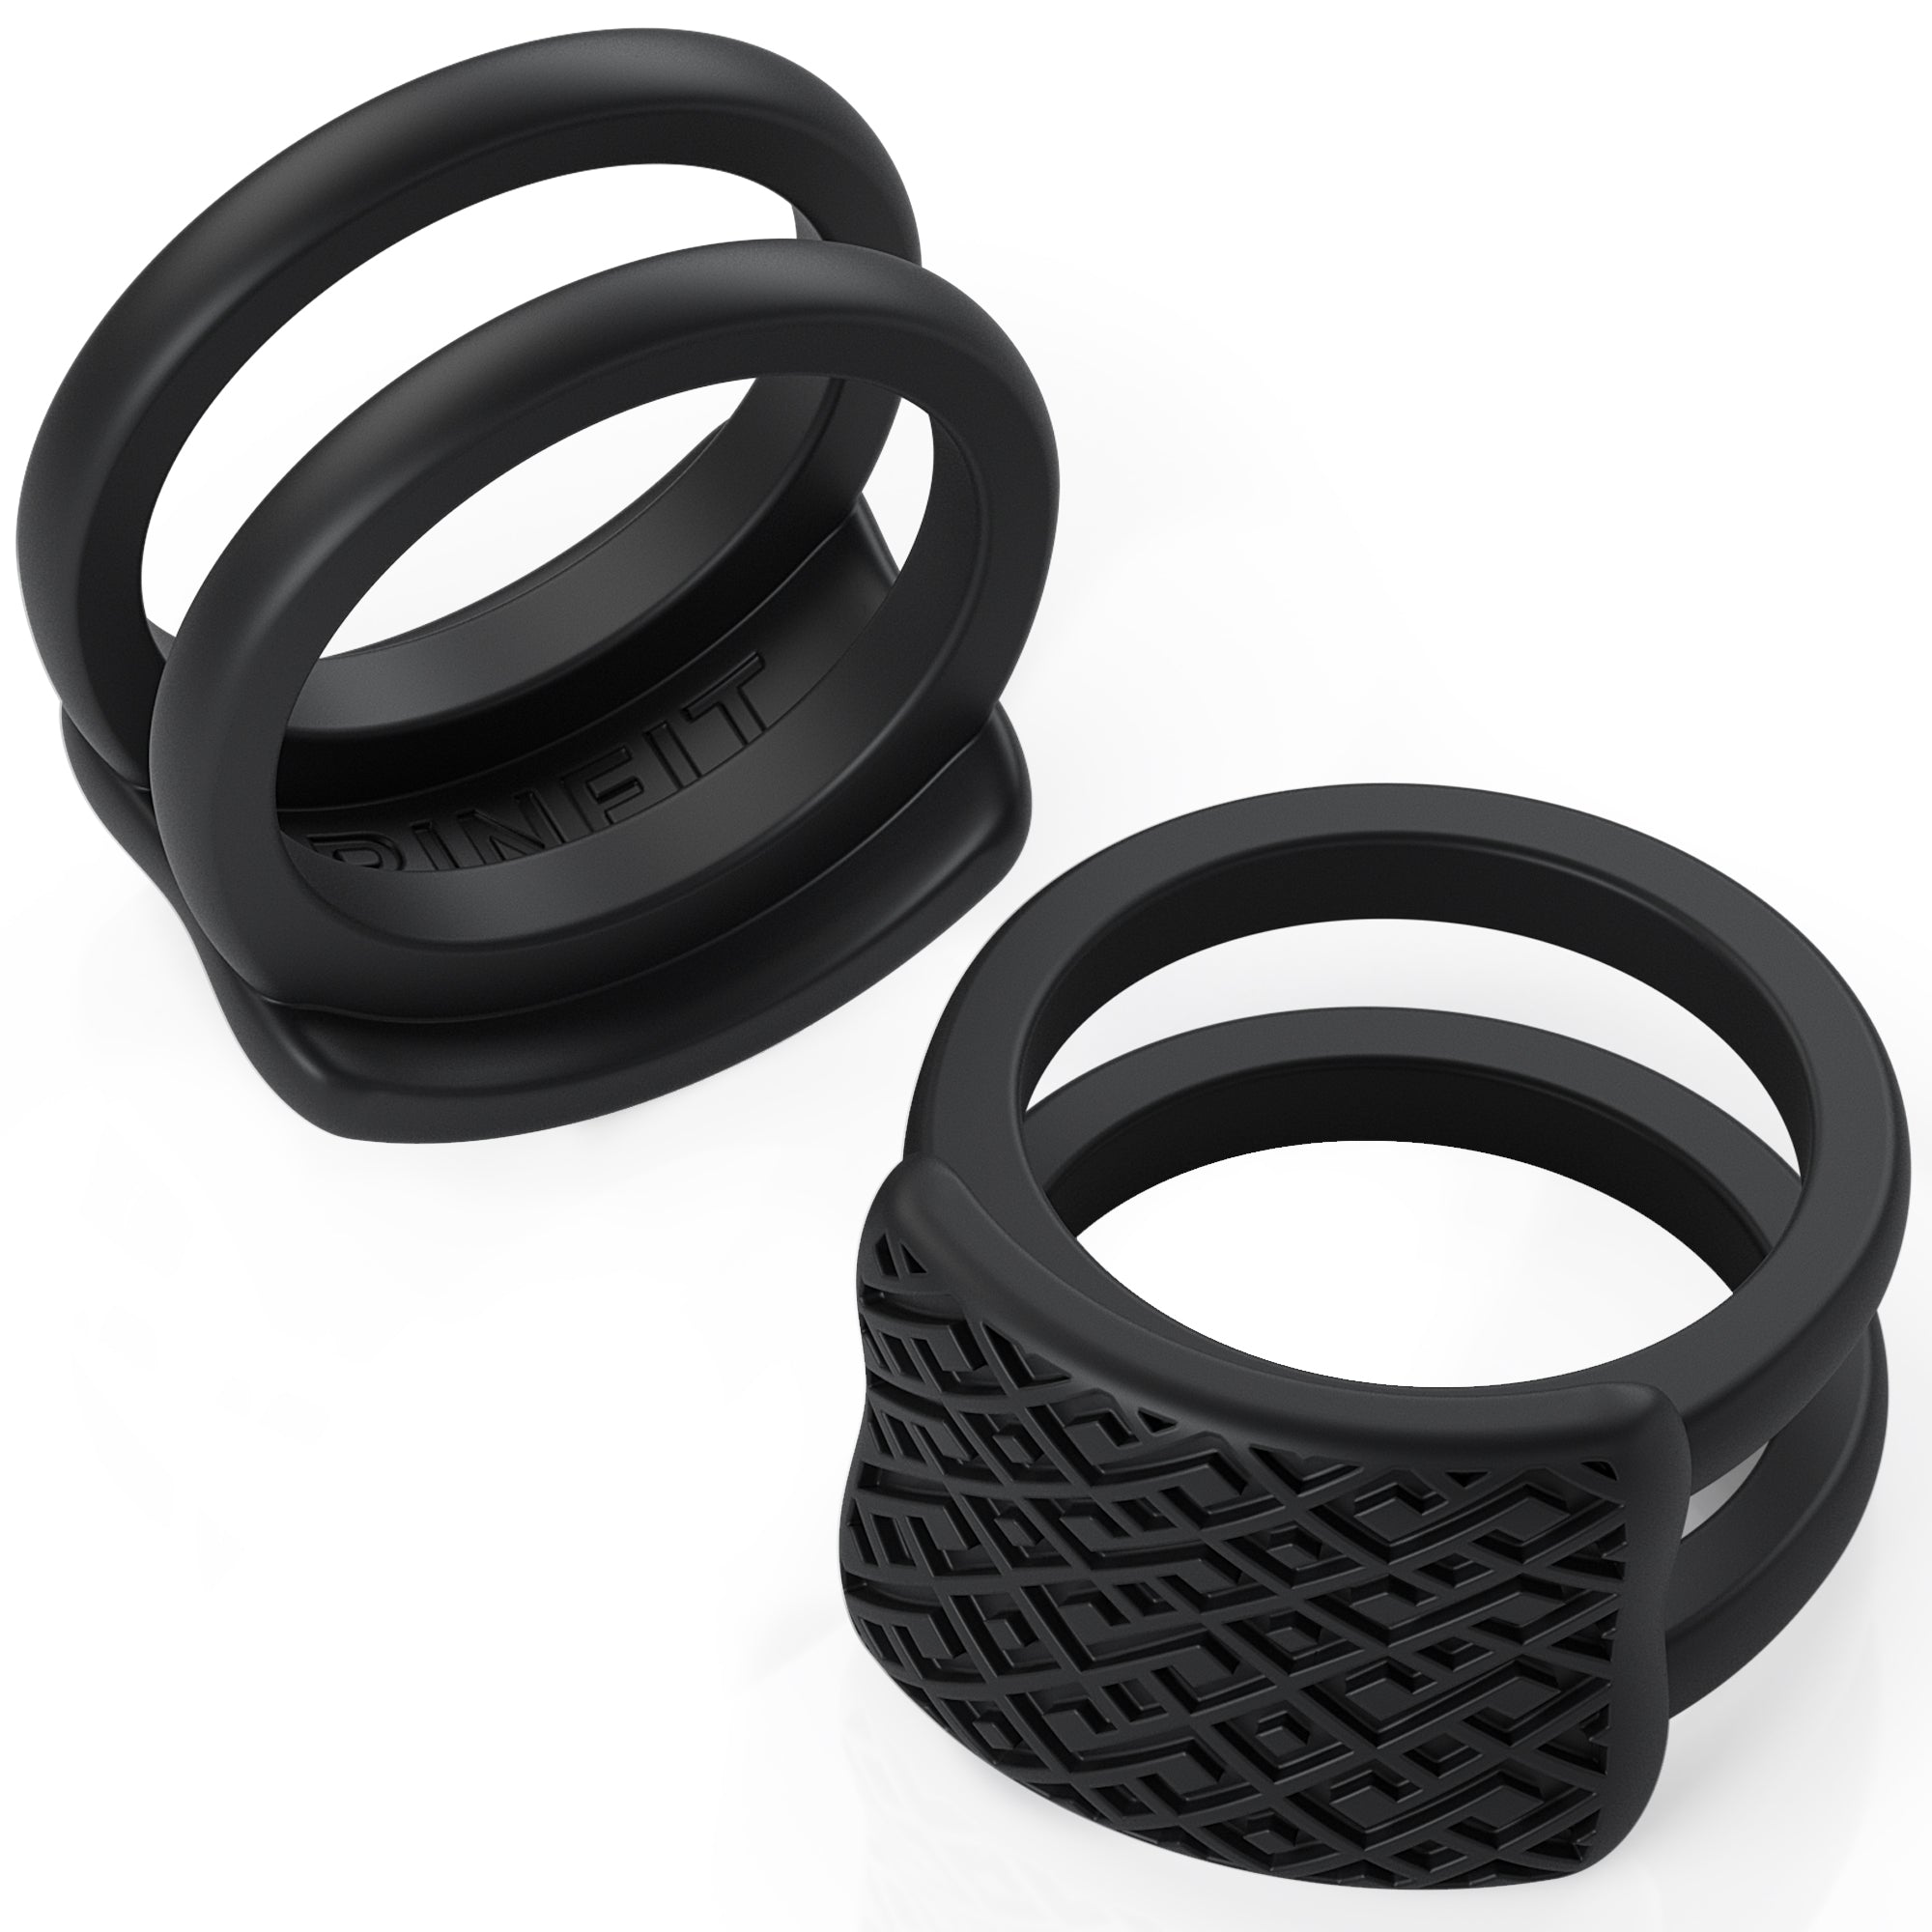 BUFFR Ring Protector For Working Out